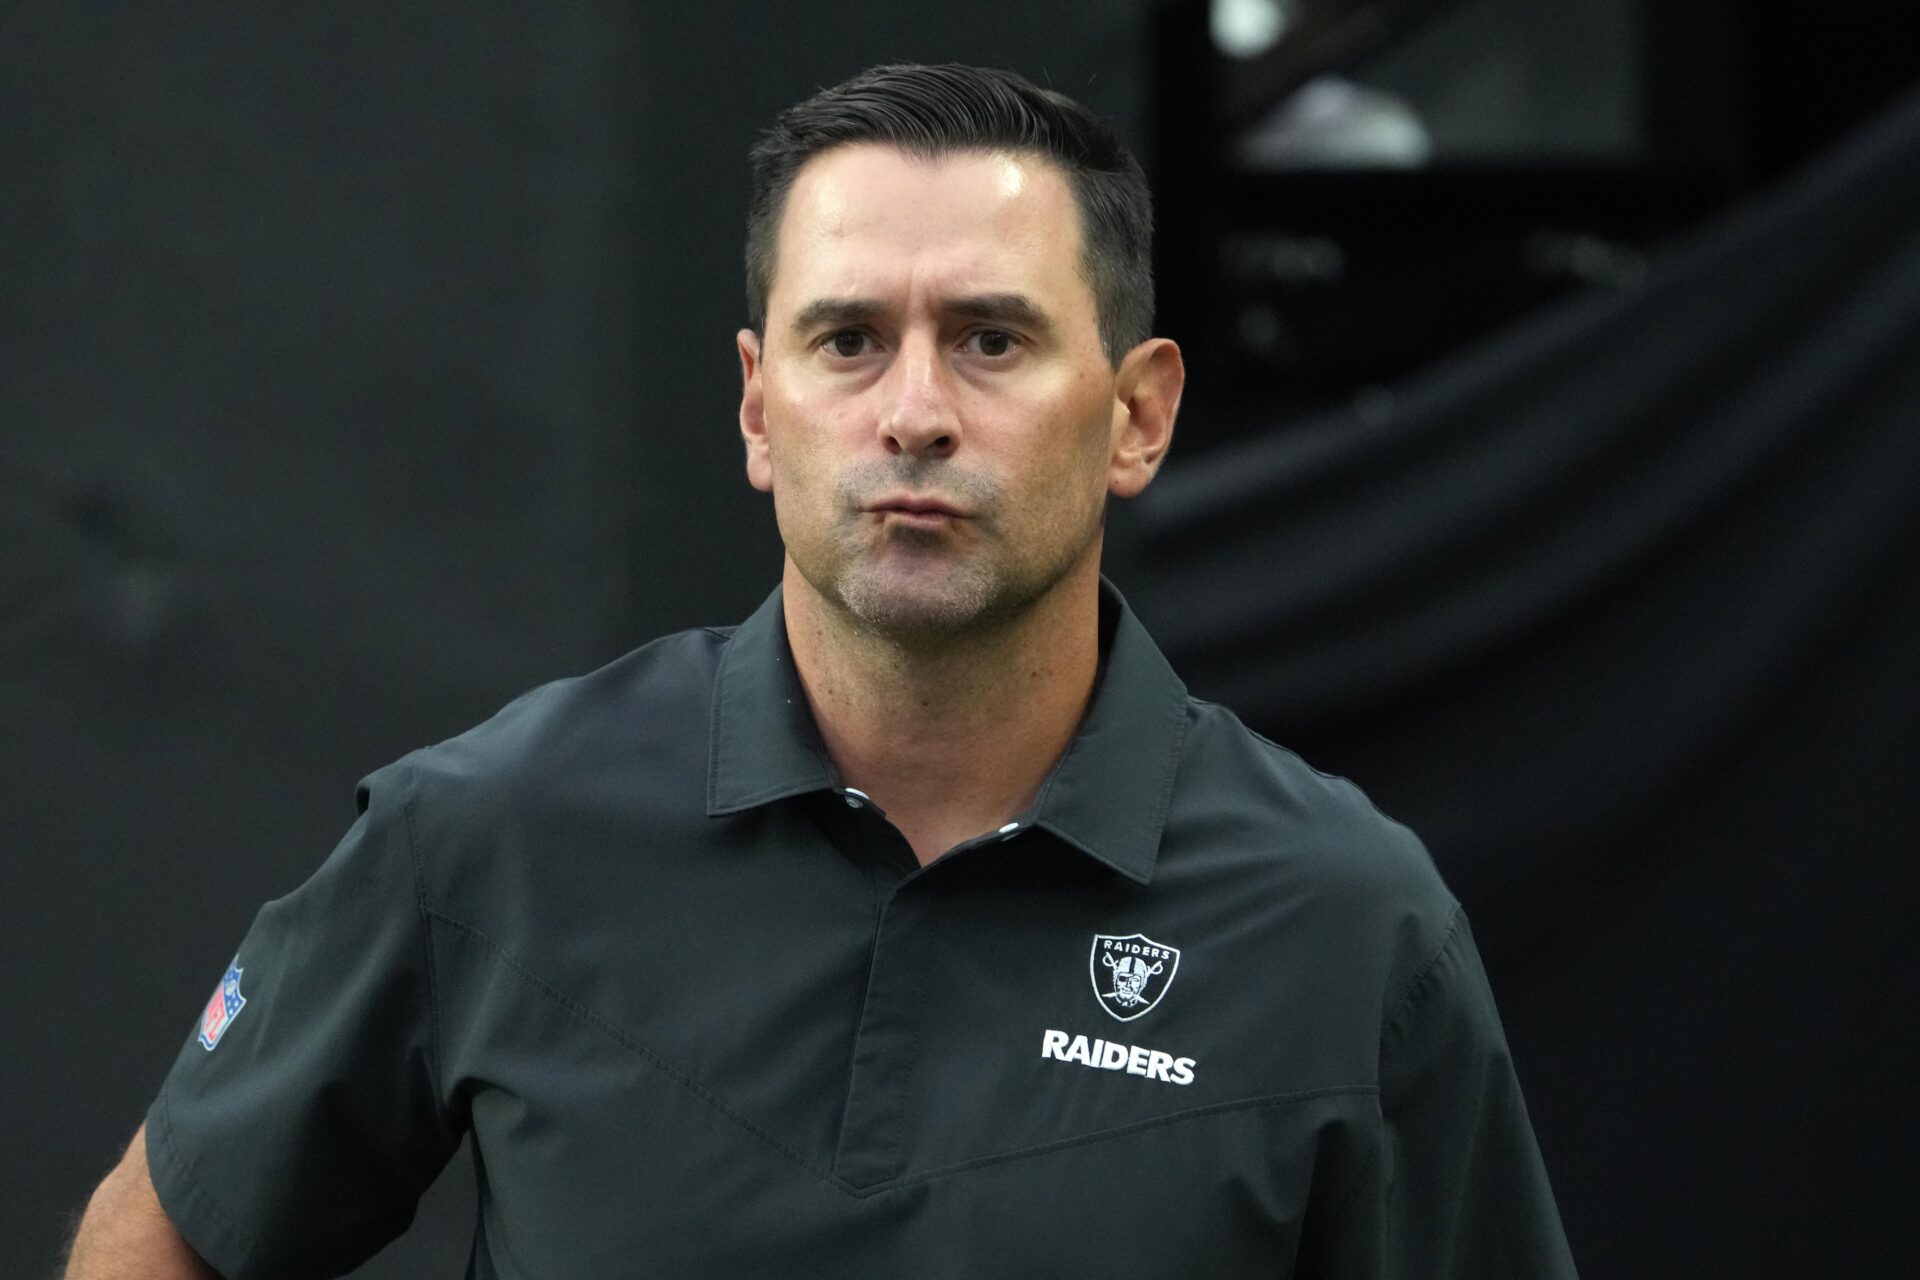 Las Vegas Raiders general manager Dave Ziegler looks on during a game.